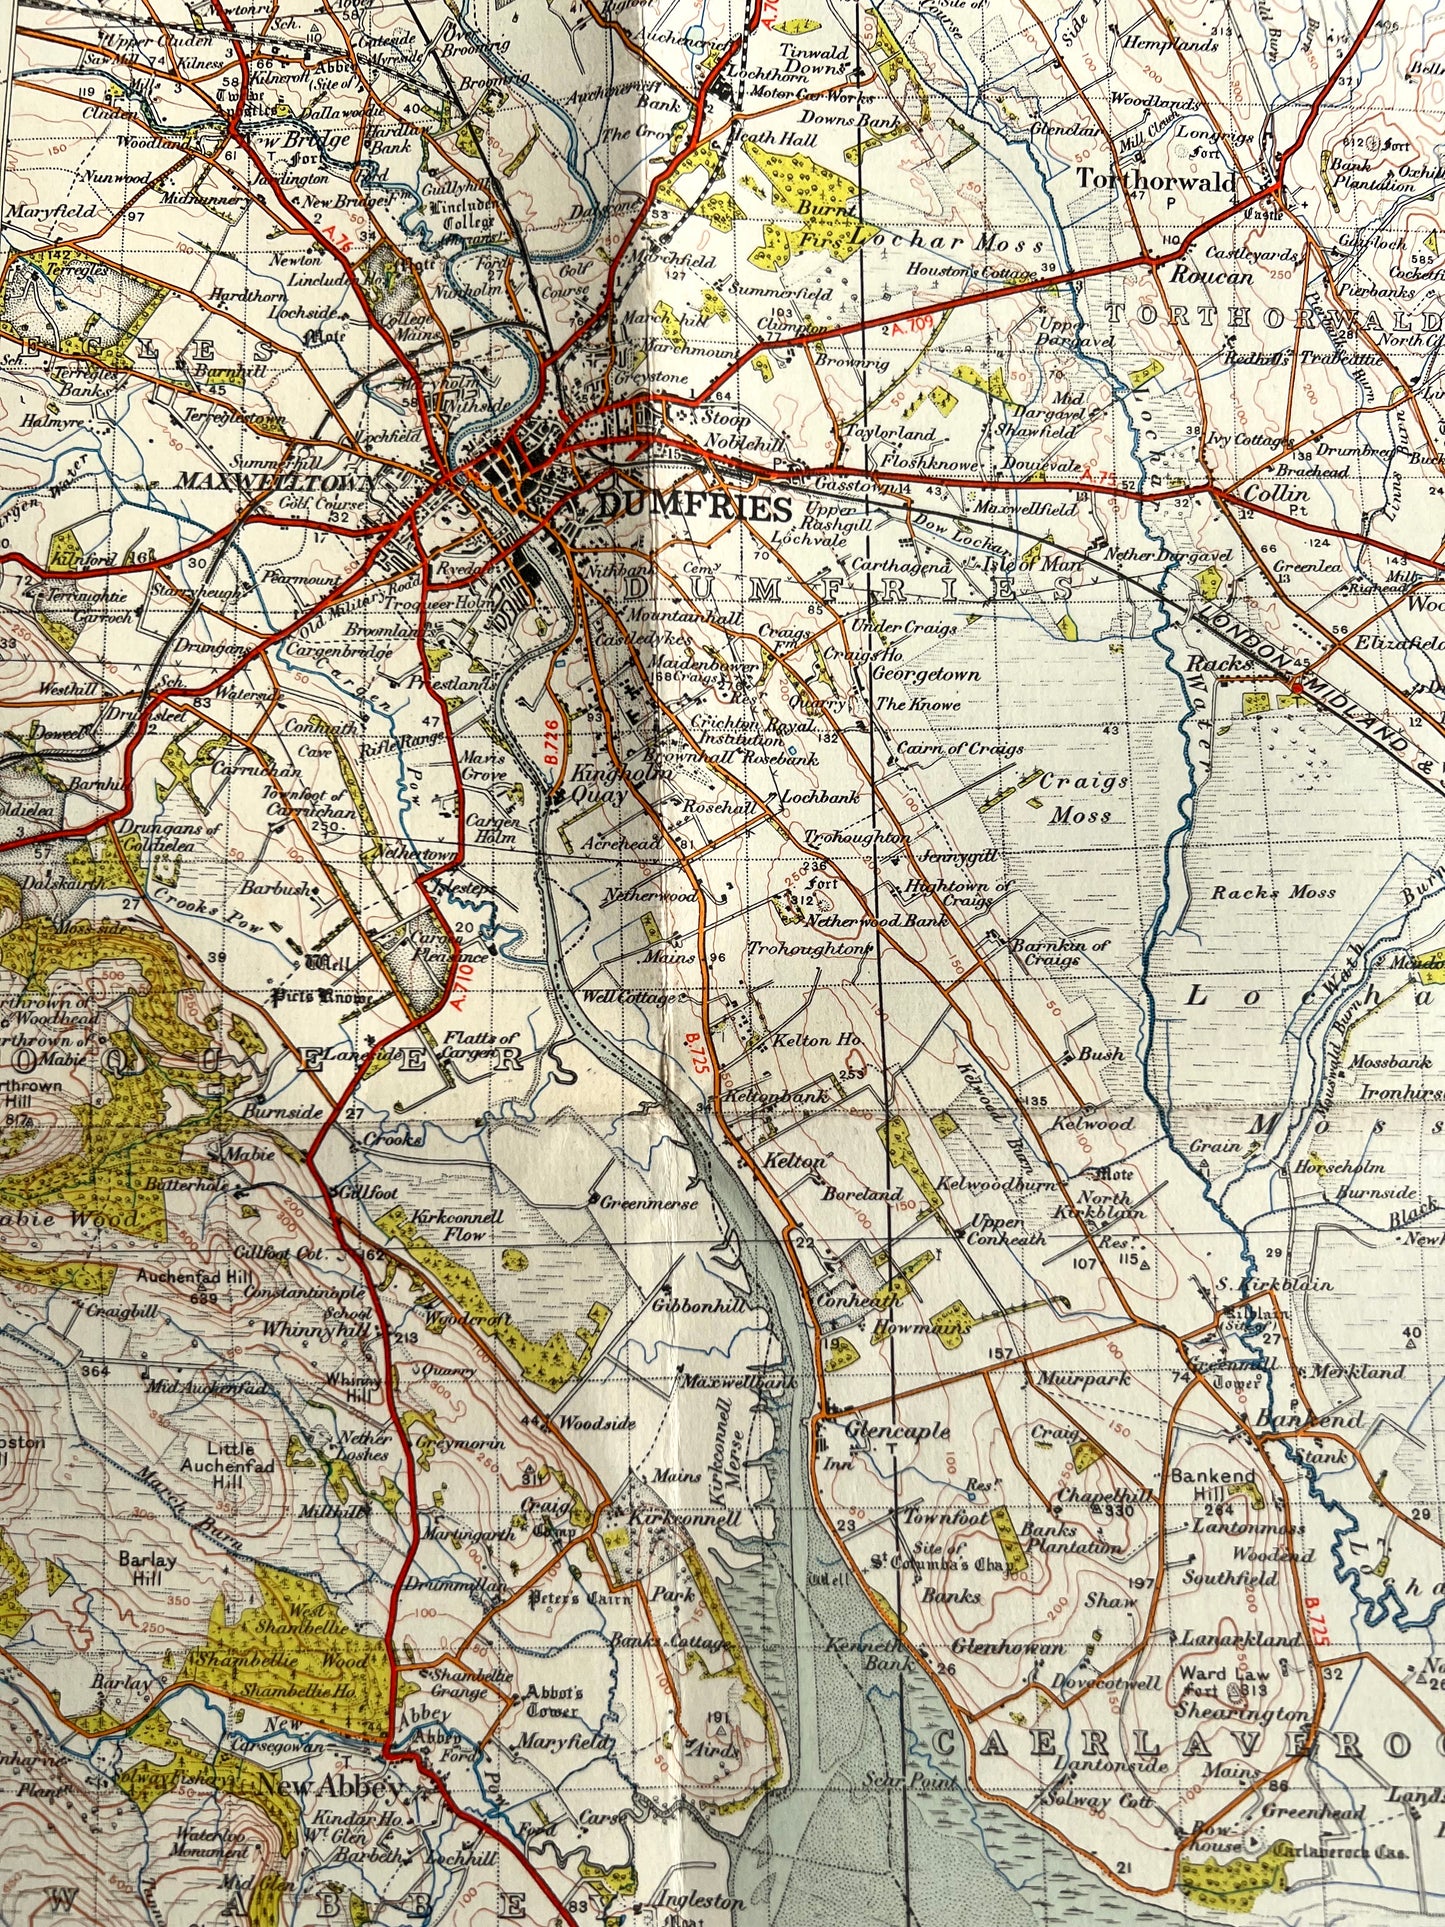 1940s One Inch ORDNANCE SURVEY Map of Dumfries and Area Sheet 75